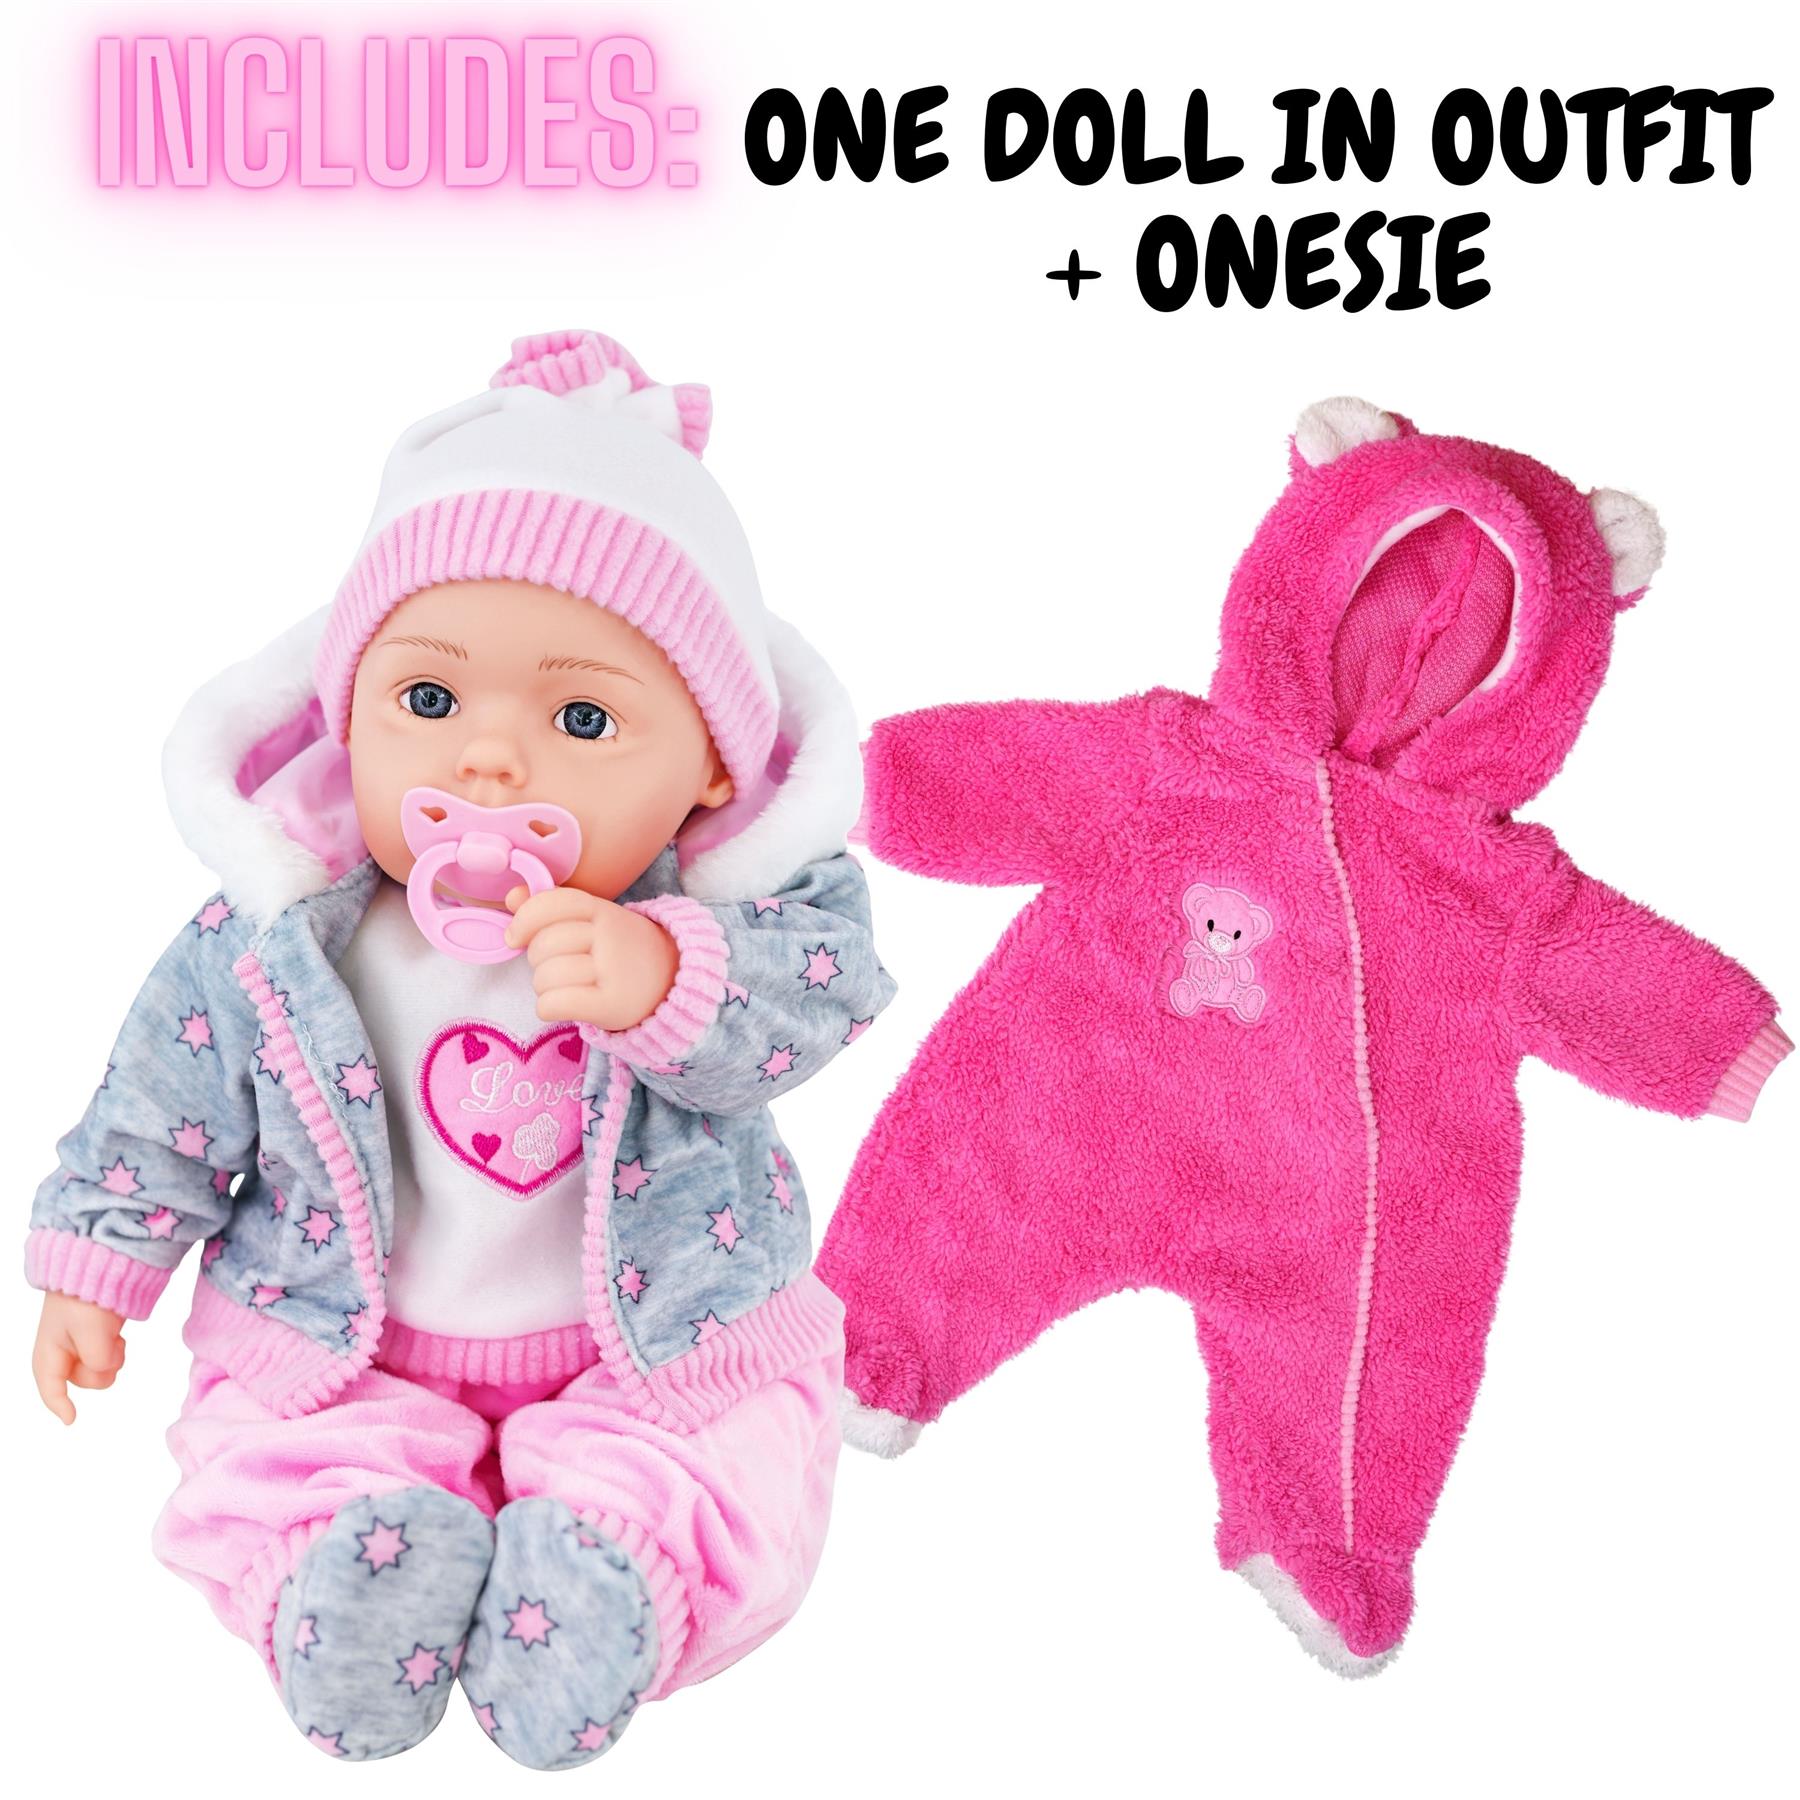 Pink Bibi Baby Doll + Extra Outfit by The Magic Toy Shop - UKBuyZone